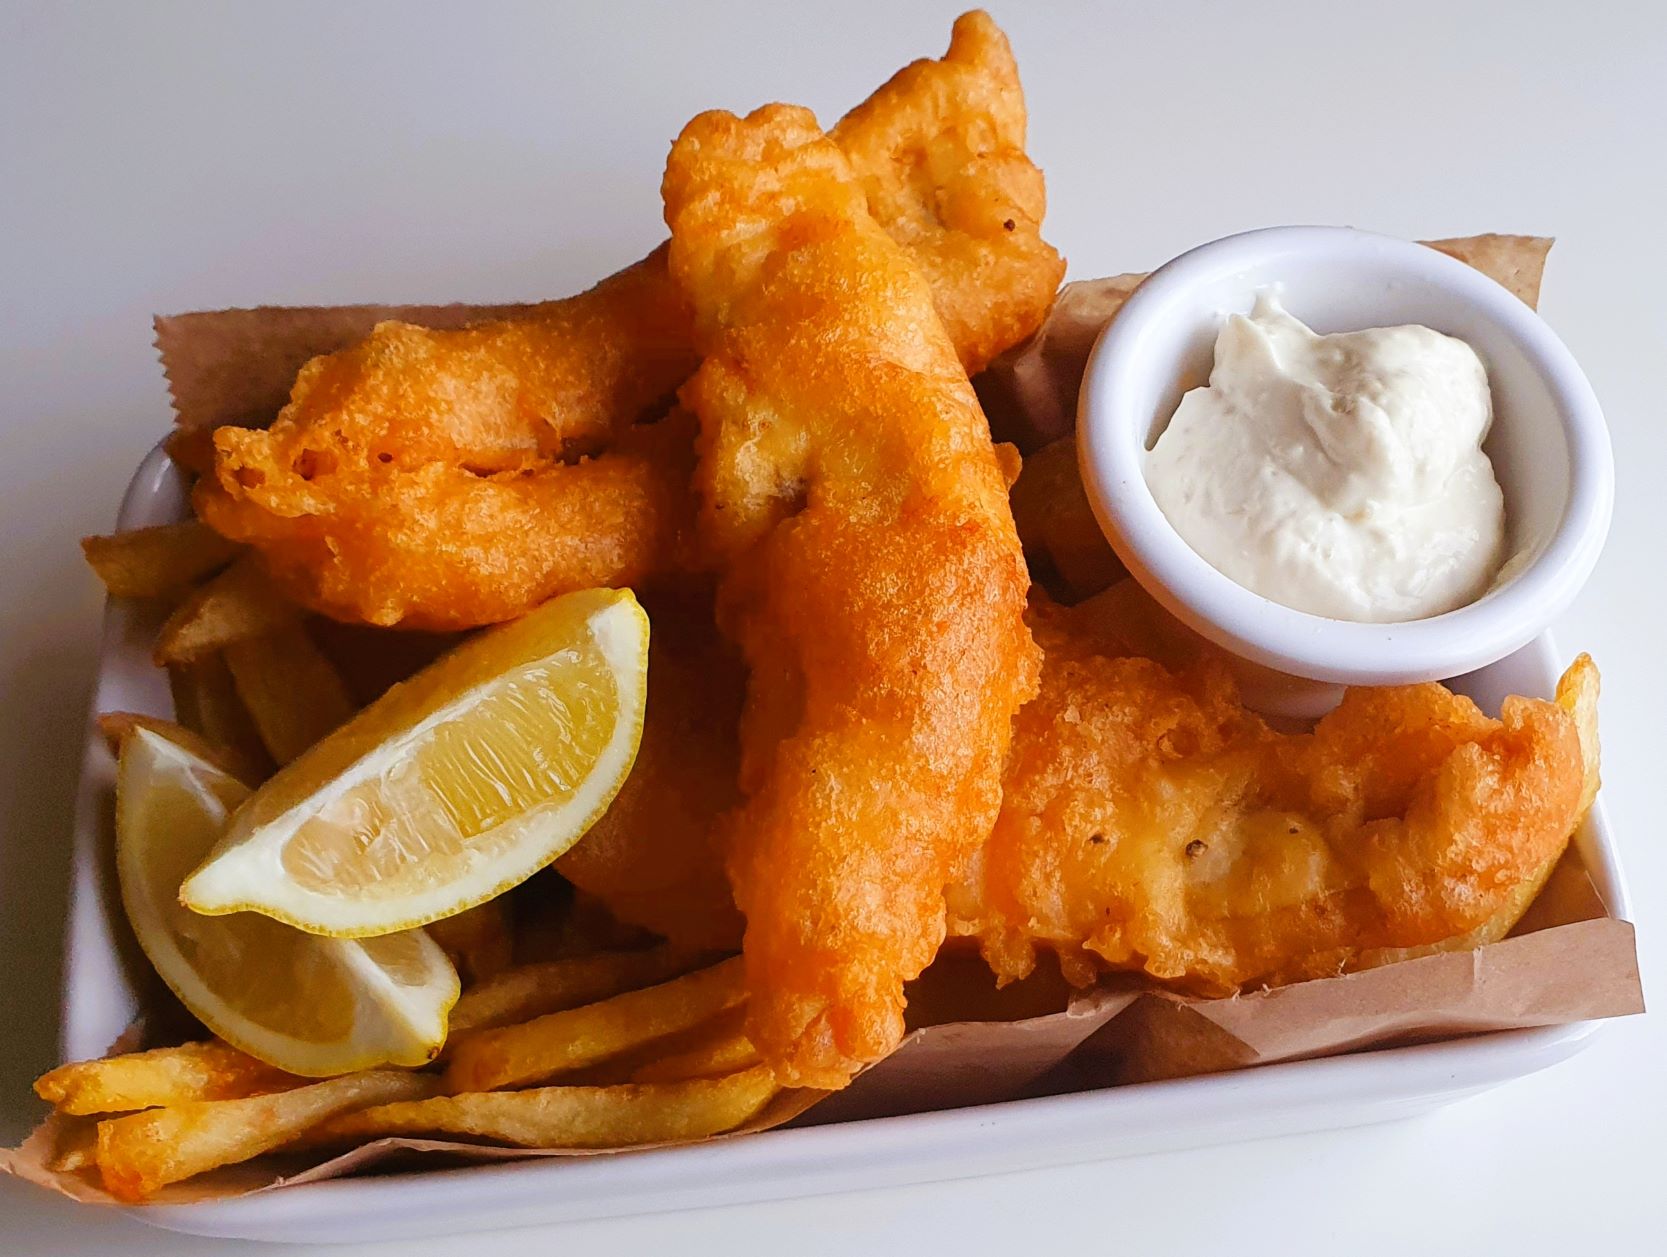 Fish and Chips Recipe: How to make Fish and Chips Recipe at Home